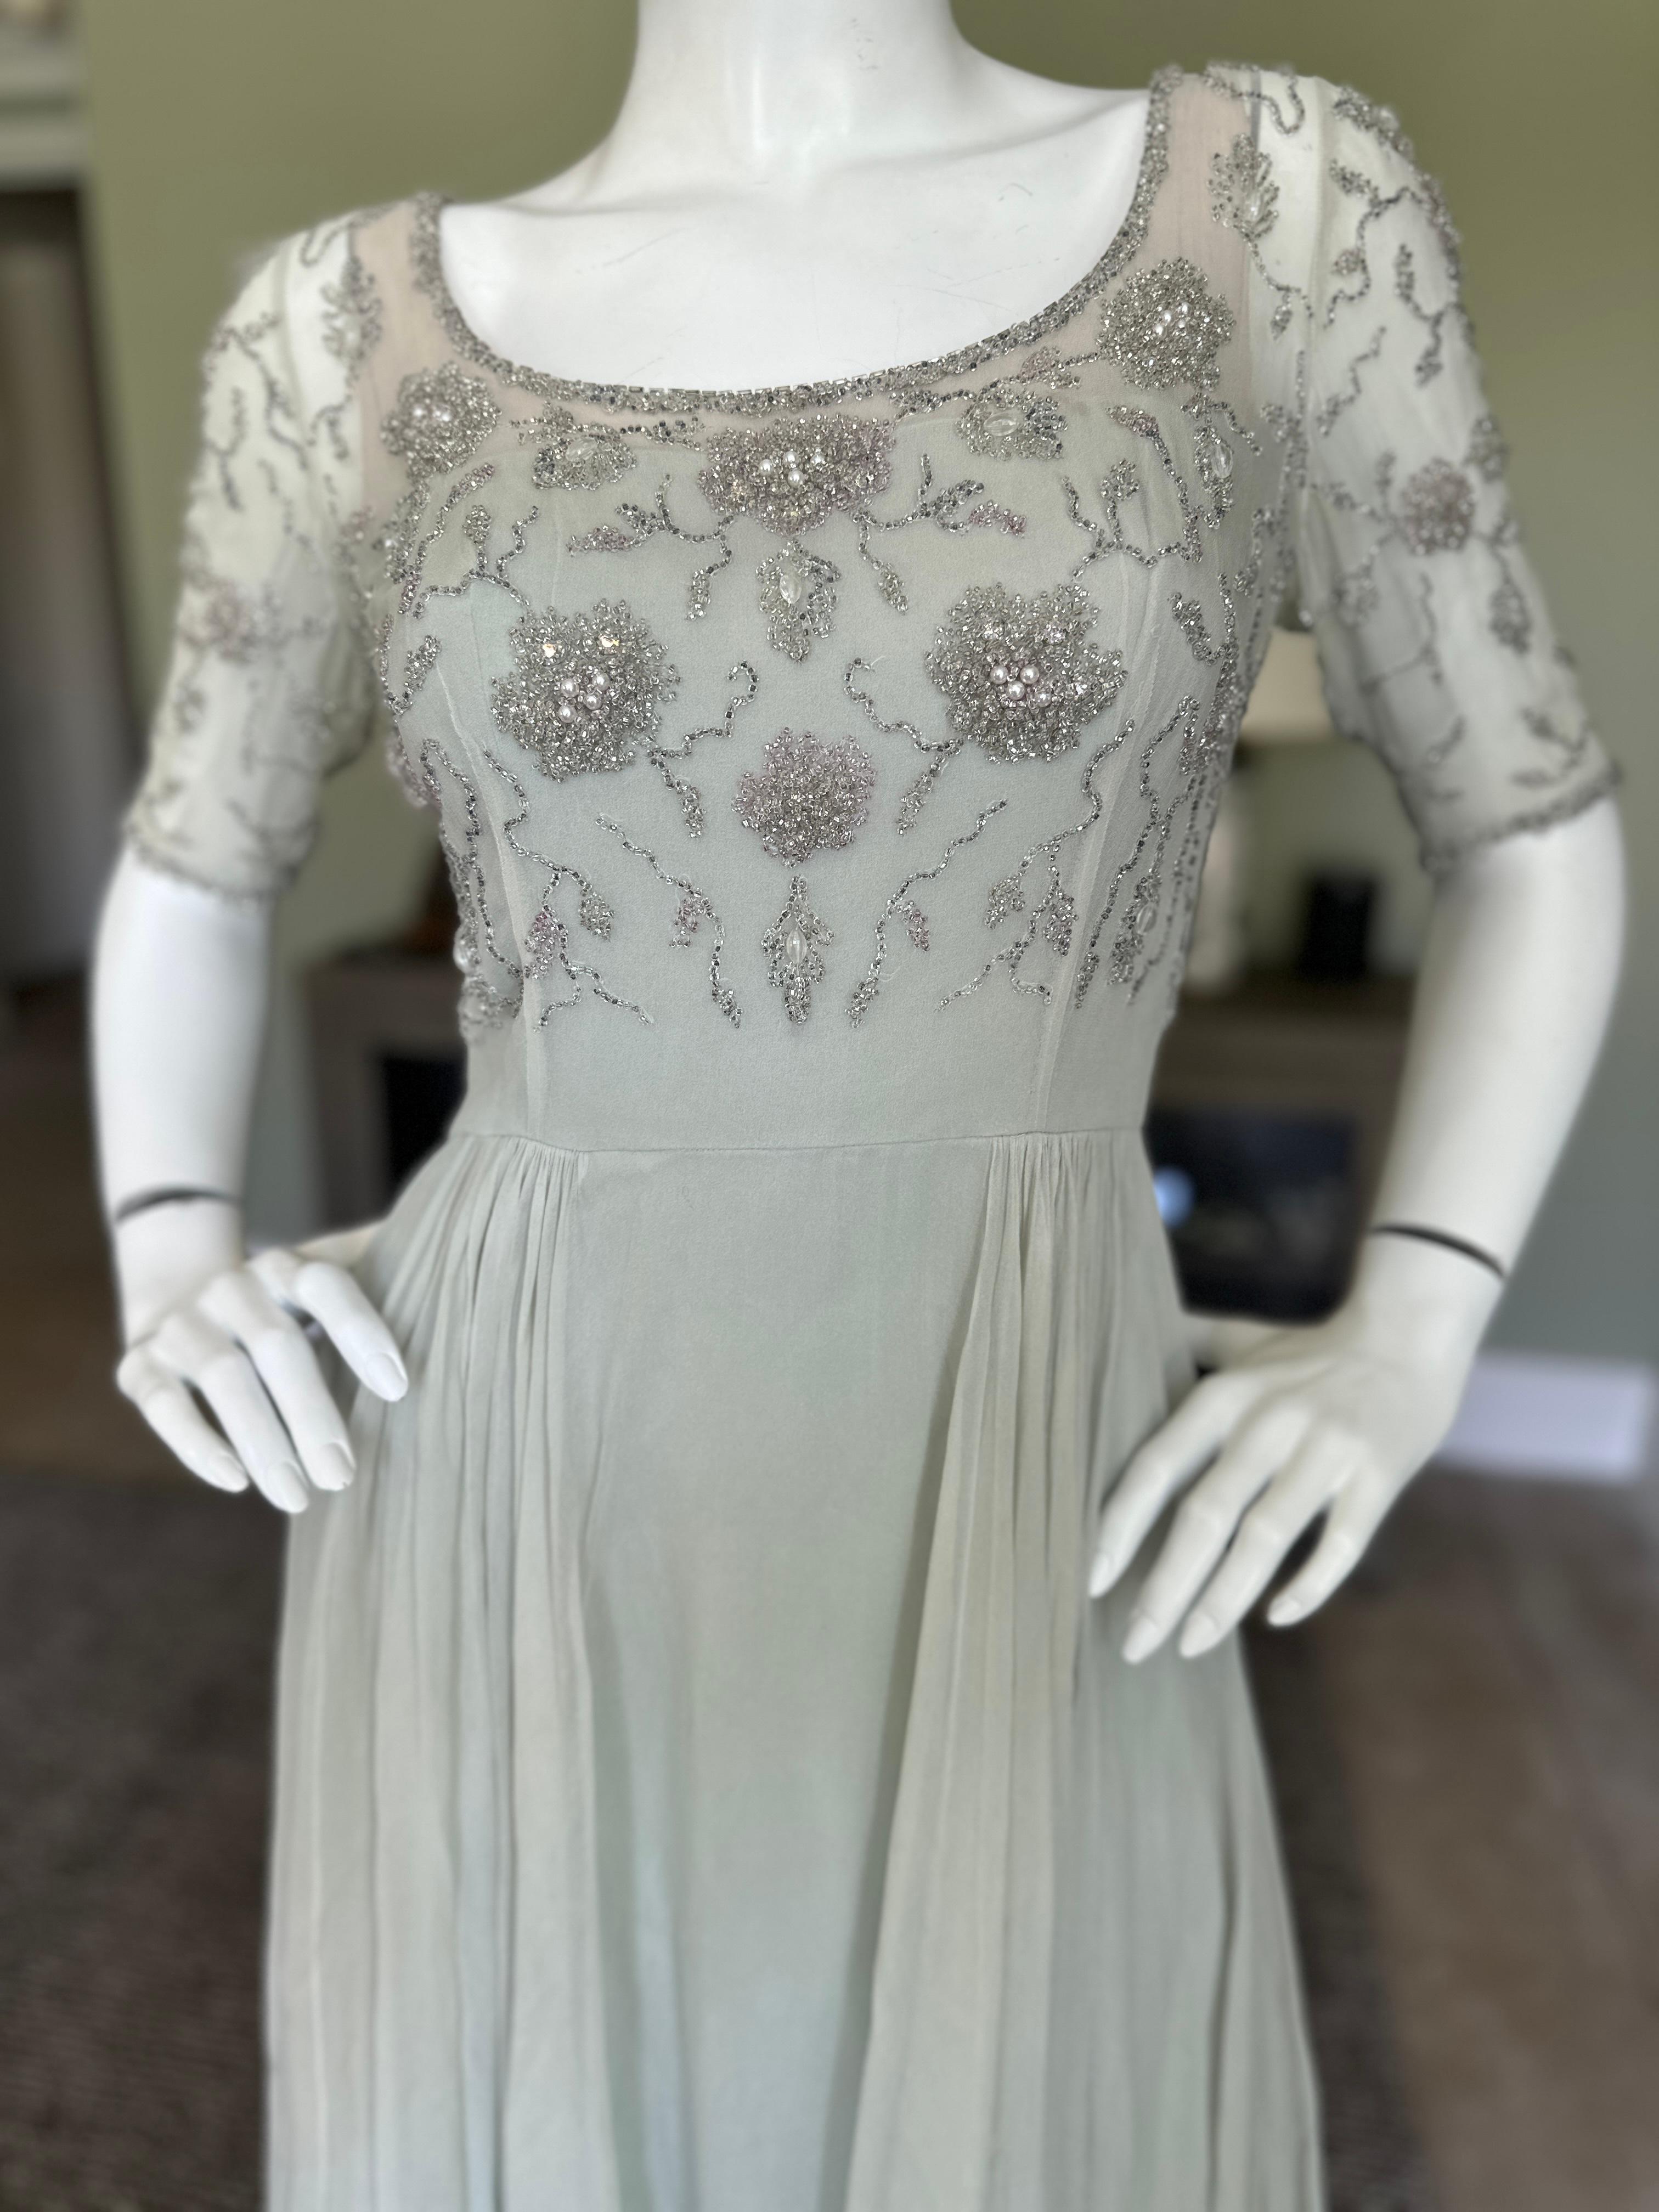  Malcolm Starr Vintage Evening Dress with Crystal Embellishments In Excellent Condition For Sale In Cloverdale, CA